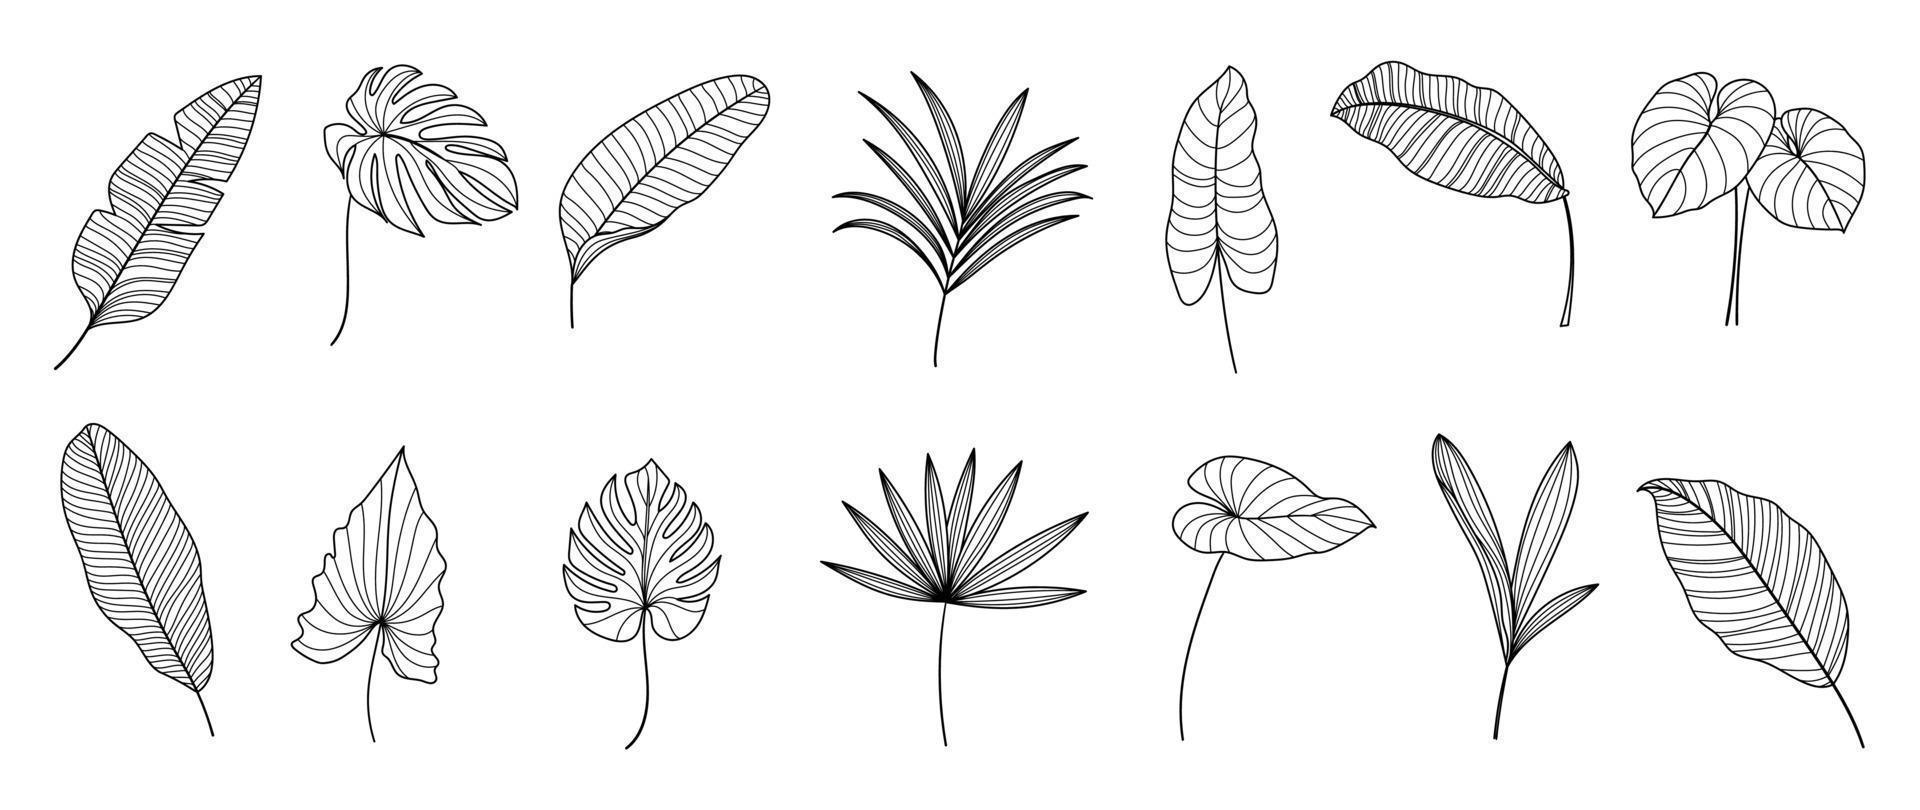 Set of hand drawn line art leaf branch vector. Collection of tropical monstera, palm leaf branch black white drawing contour simple style. Design illustration for prints, logo, poster, card, branding. vector